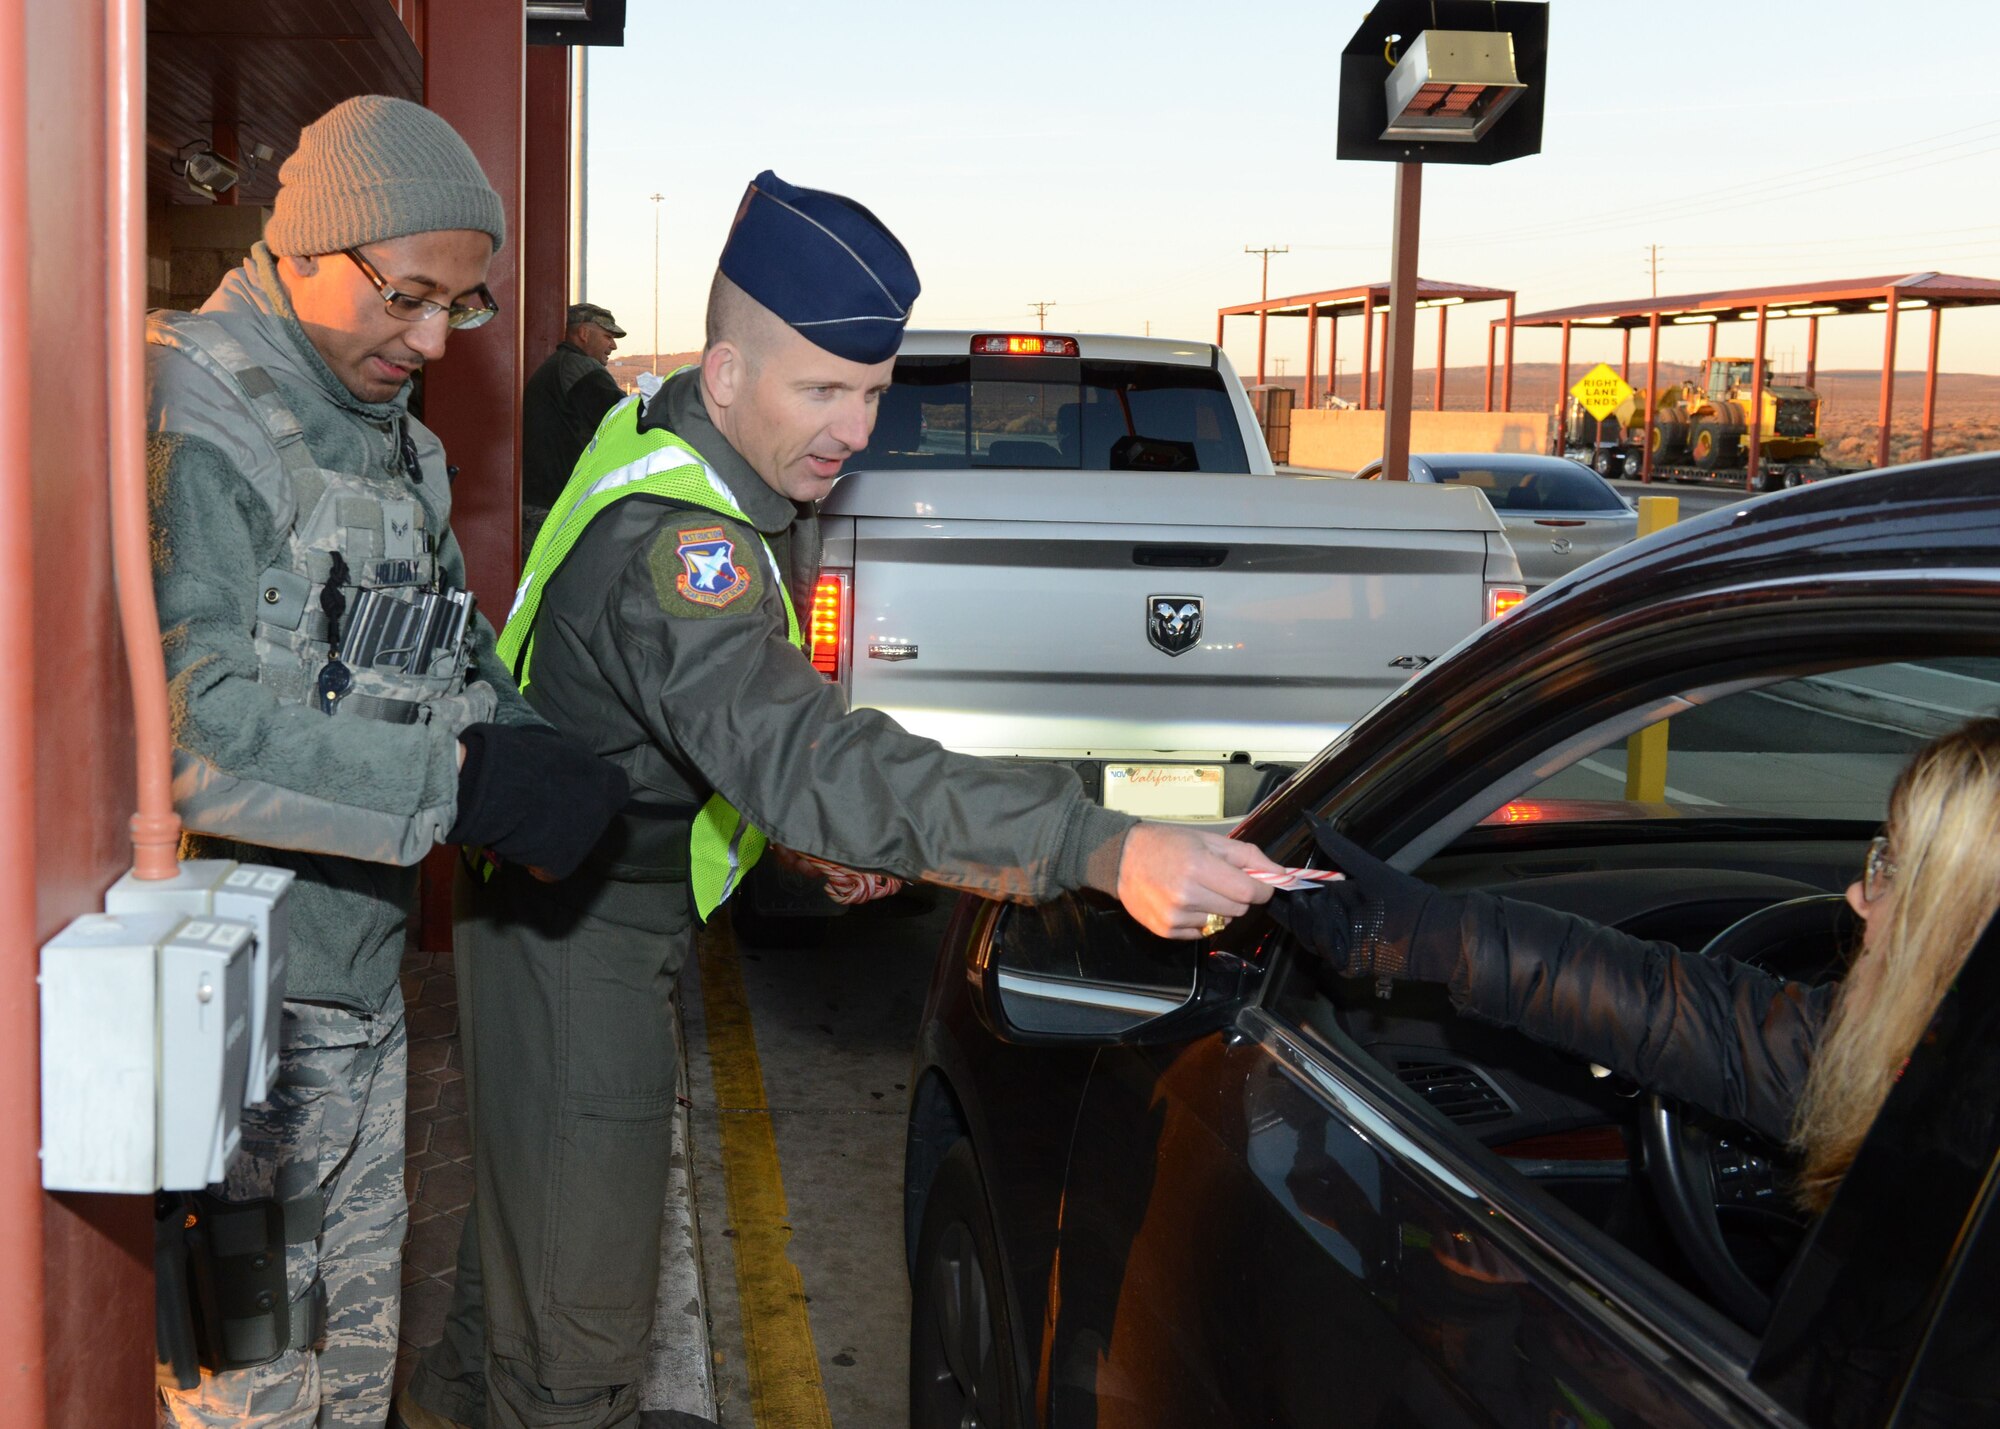 Col. Matthew Higer, U.S. Air Force Test Pilot School commandant, hands a candy cane and holiday card to a motorist at Edwards AFB’s North Gate Dec. 18. The colonel teamed up with Airman 1st Class Jerome Holliday, 412th Security Forces Squadron, for the morning. (U.S. Air Force photo by Kenji Thuloweit)